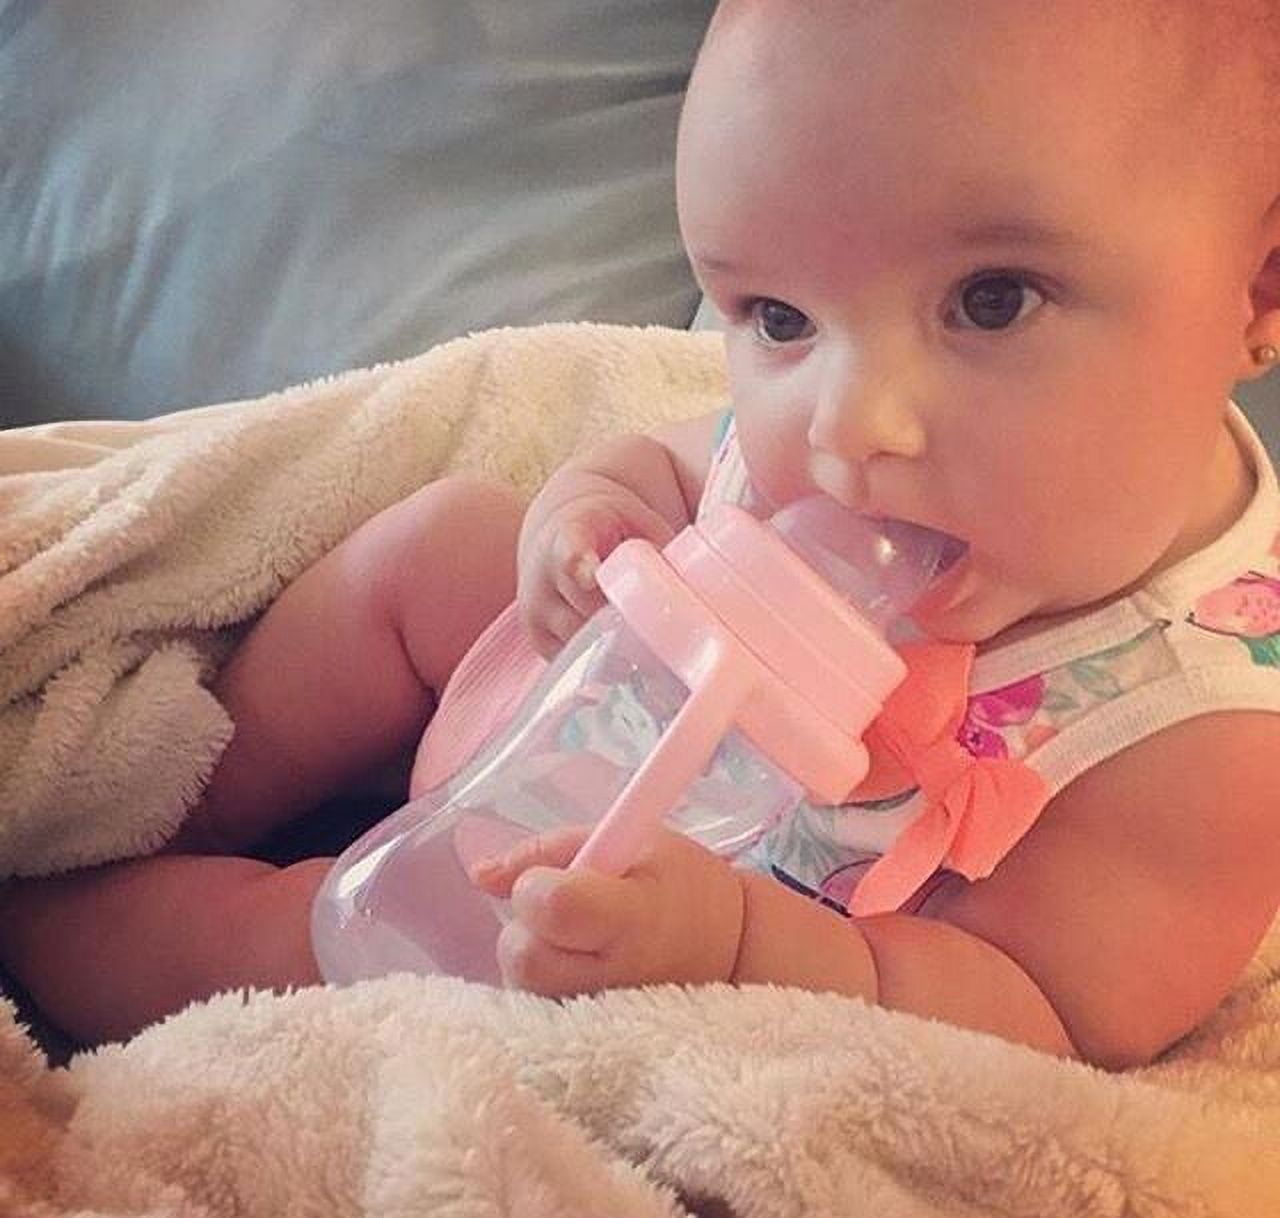 Peri loves her new cup and it's too cute! #babiesoftiktok